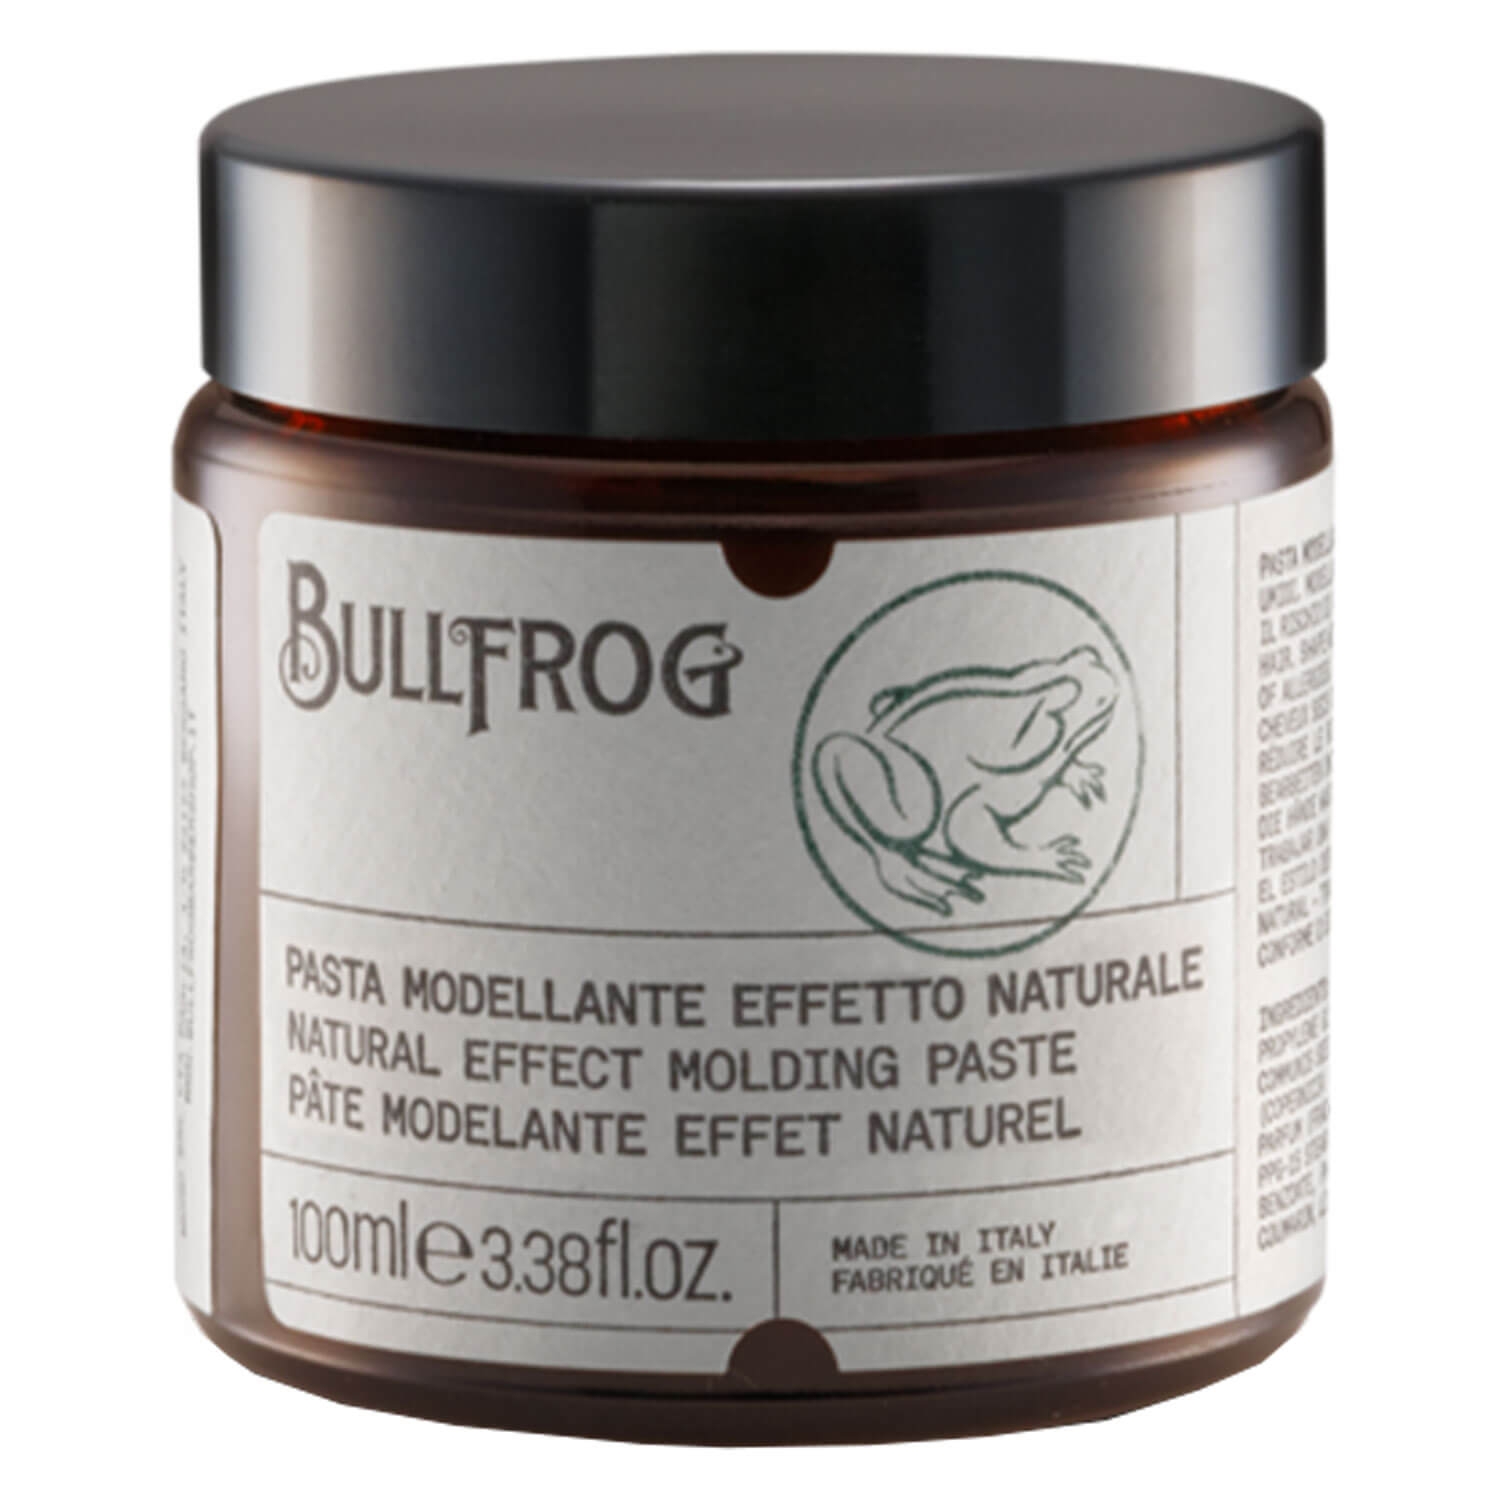 Product image from BULLFROG - Natural Effect Molding Paste